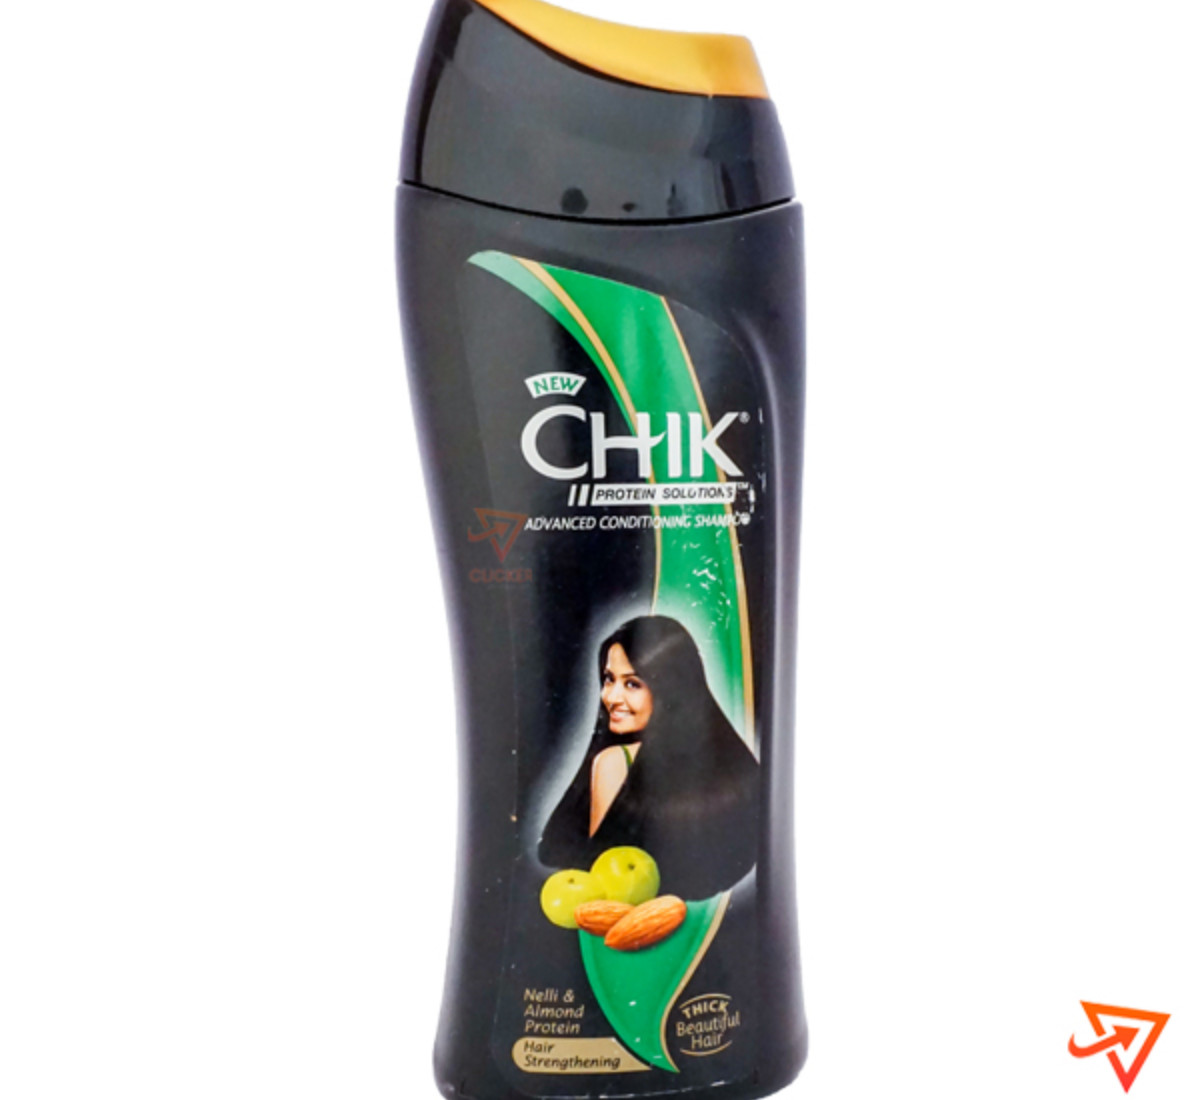 Clicker product 180ml CHIK protein solutions advanced conditioning shampoo nelli and almond 1091